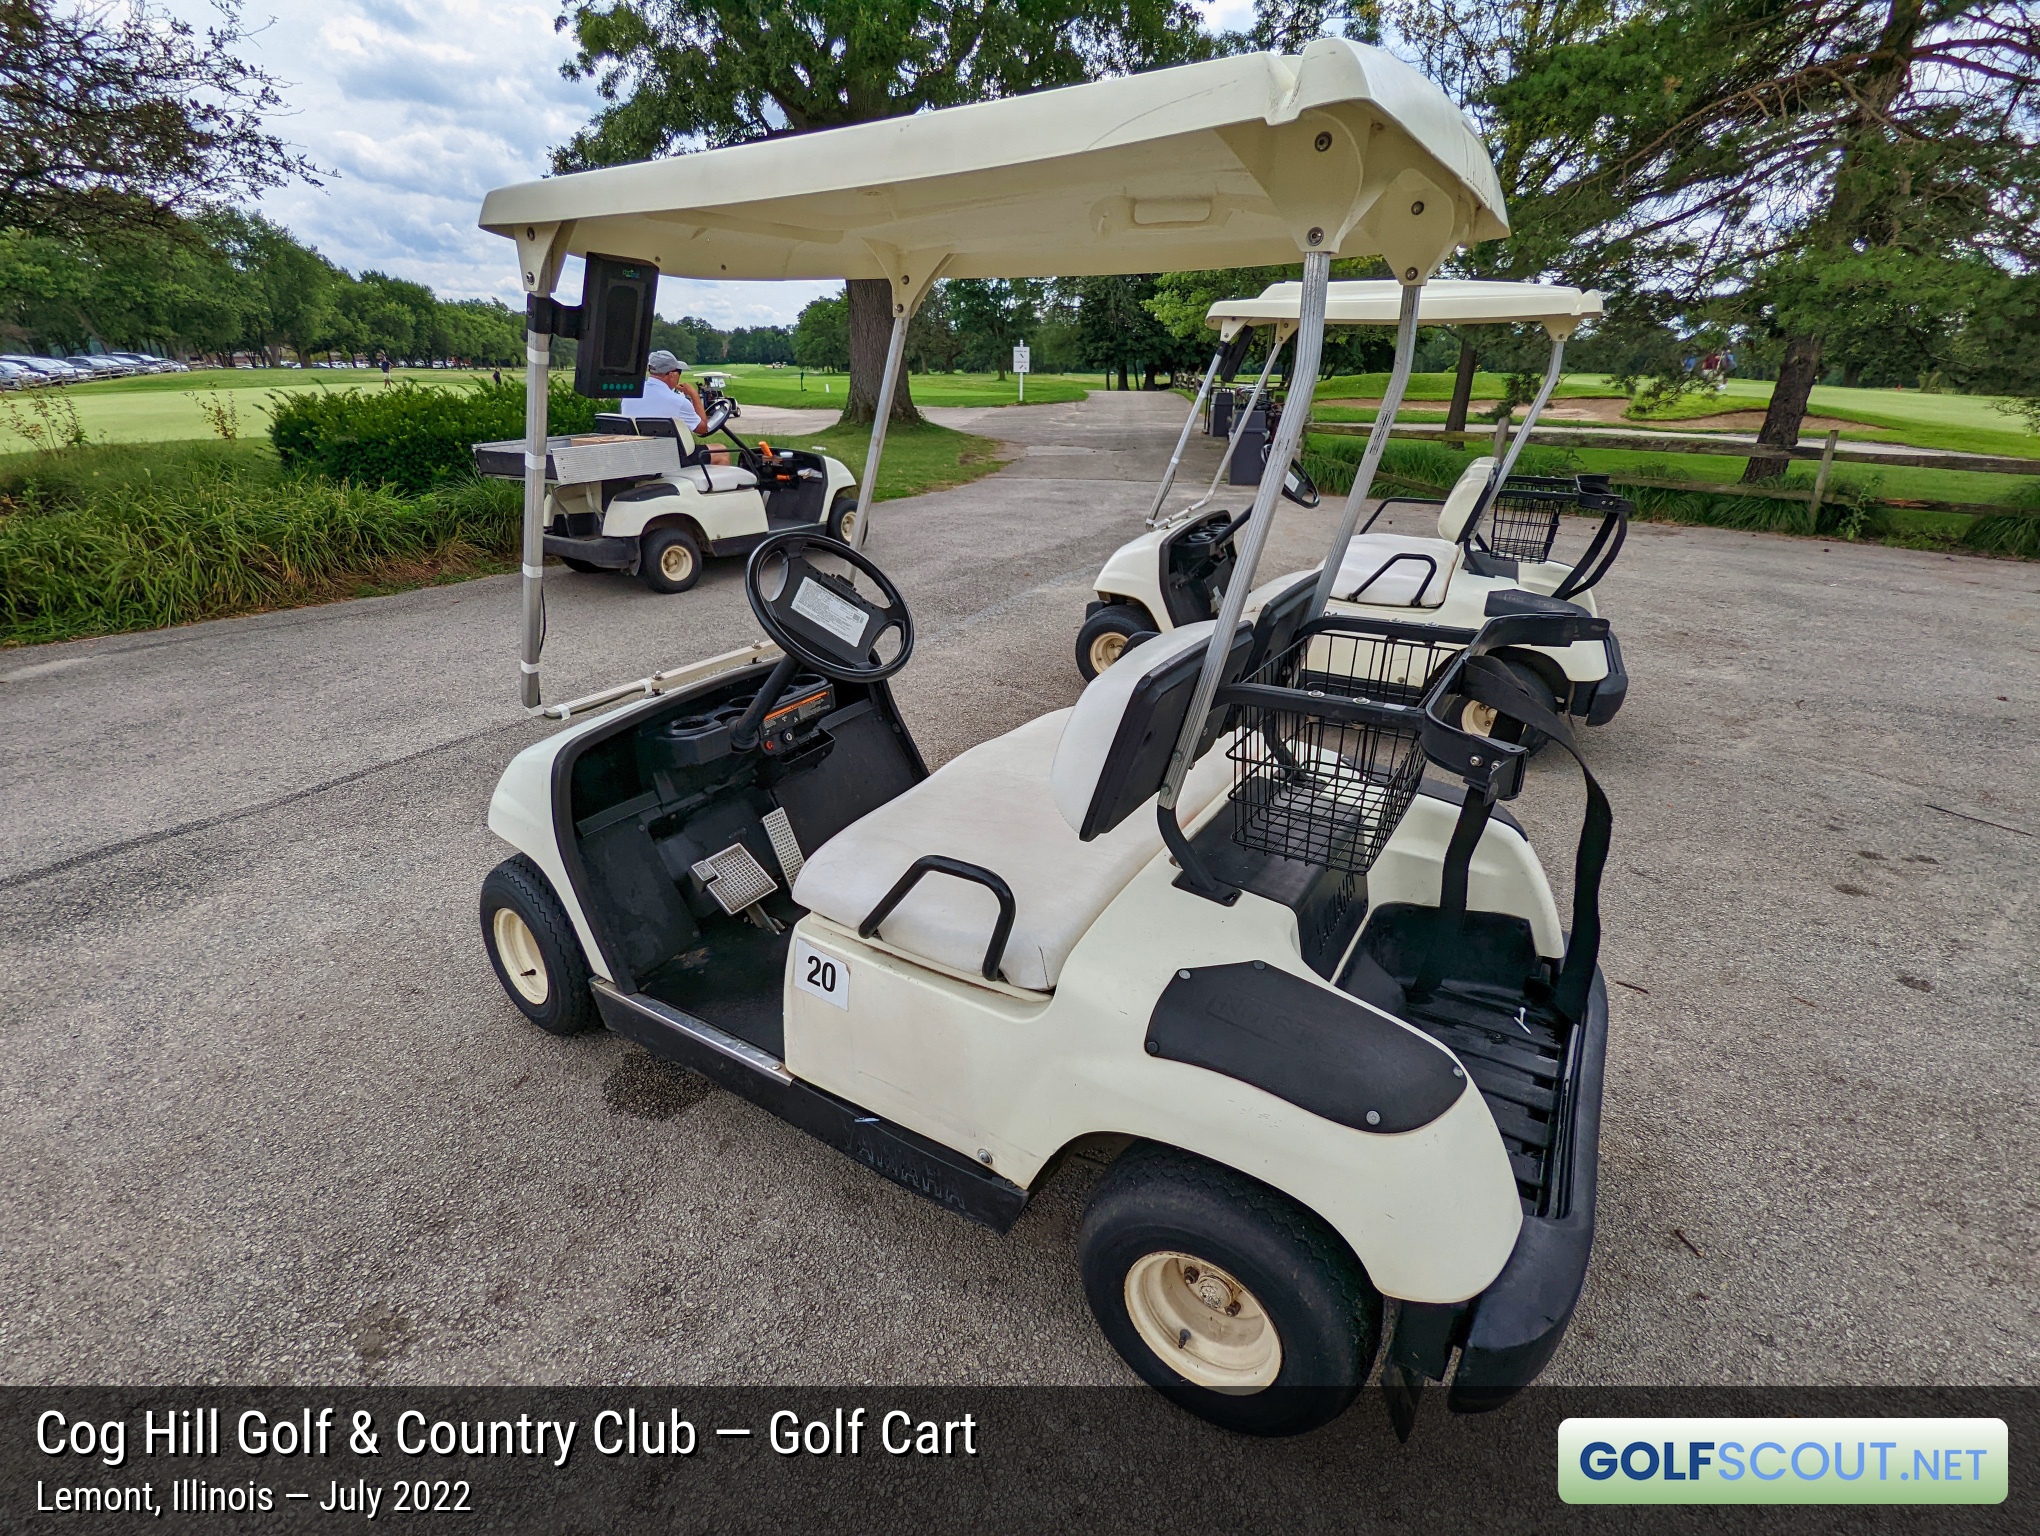 Photo of the golf carts at Cog Hill Course #1 in Lemont, Illinois. The golf carts on courses 1 and 3 do not have GPS. Courses 2 and 4 have that.